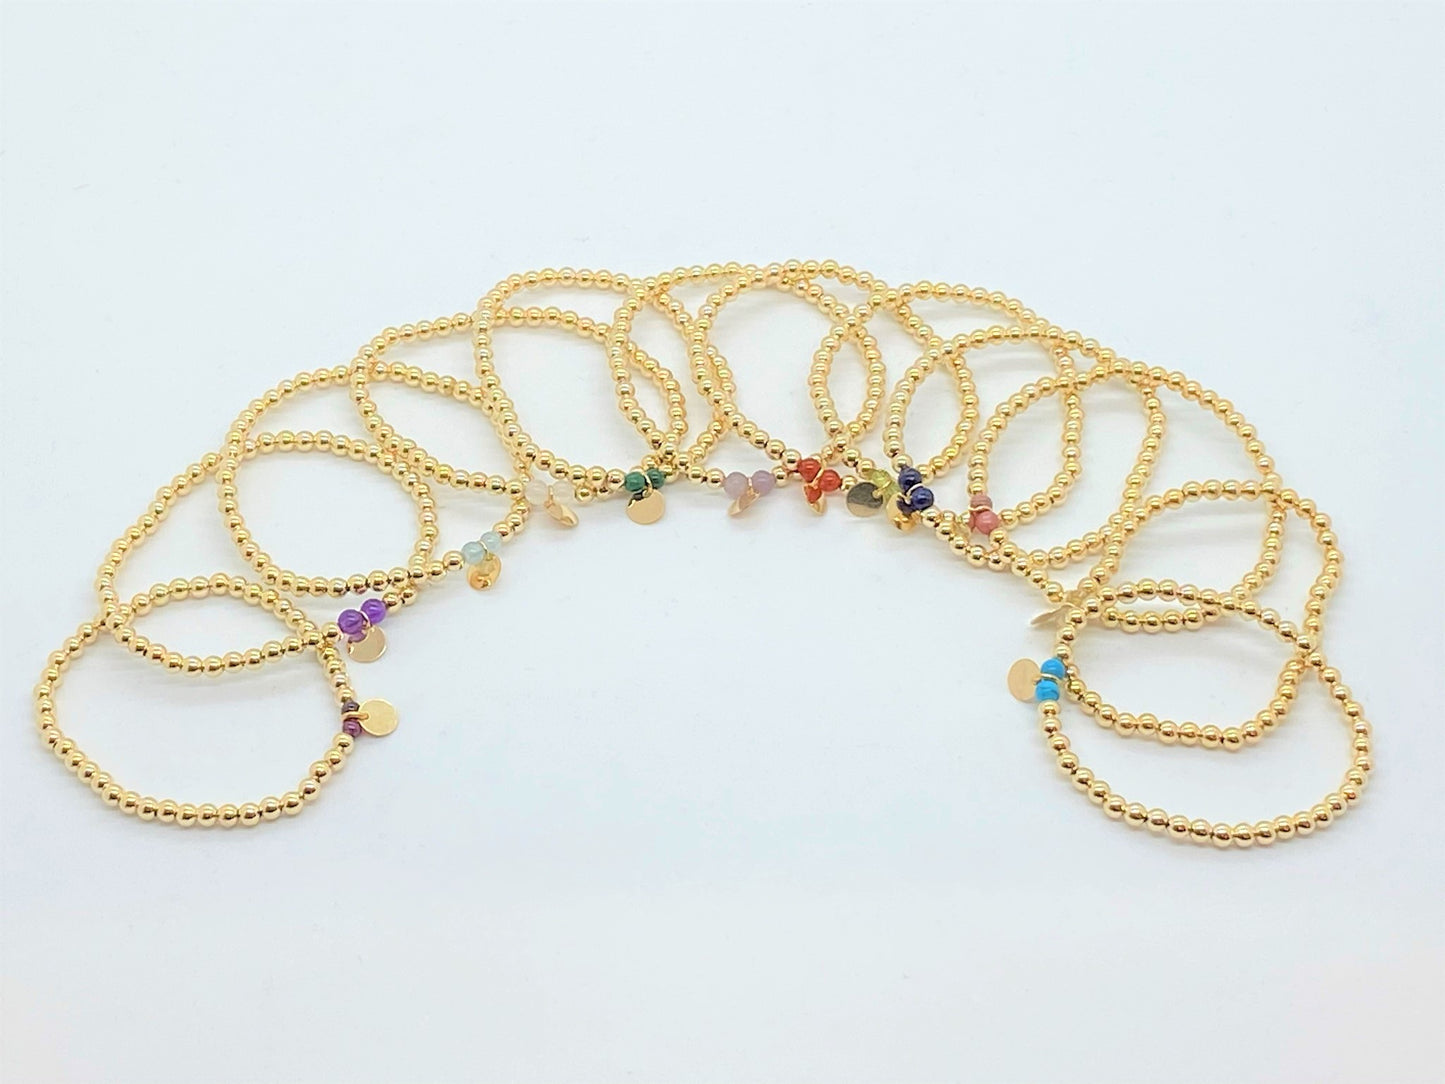 Sterling Silver and Gold Filled Hand Stamped Stretch Birthstone Bracelets - Emmis Jewelry, Bracelet, [product_color]